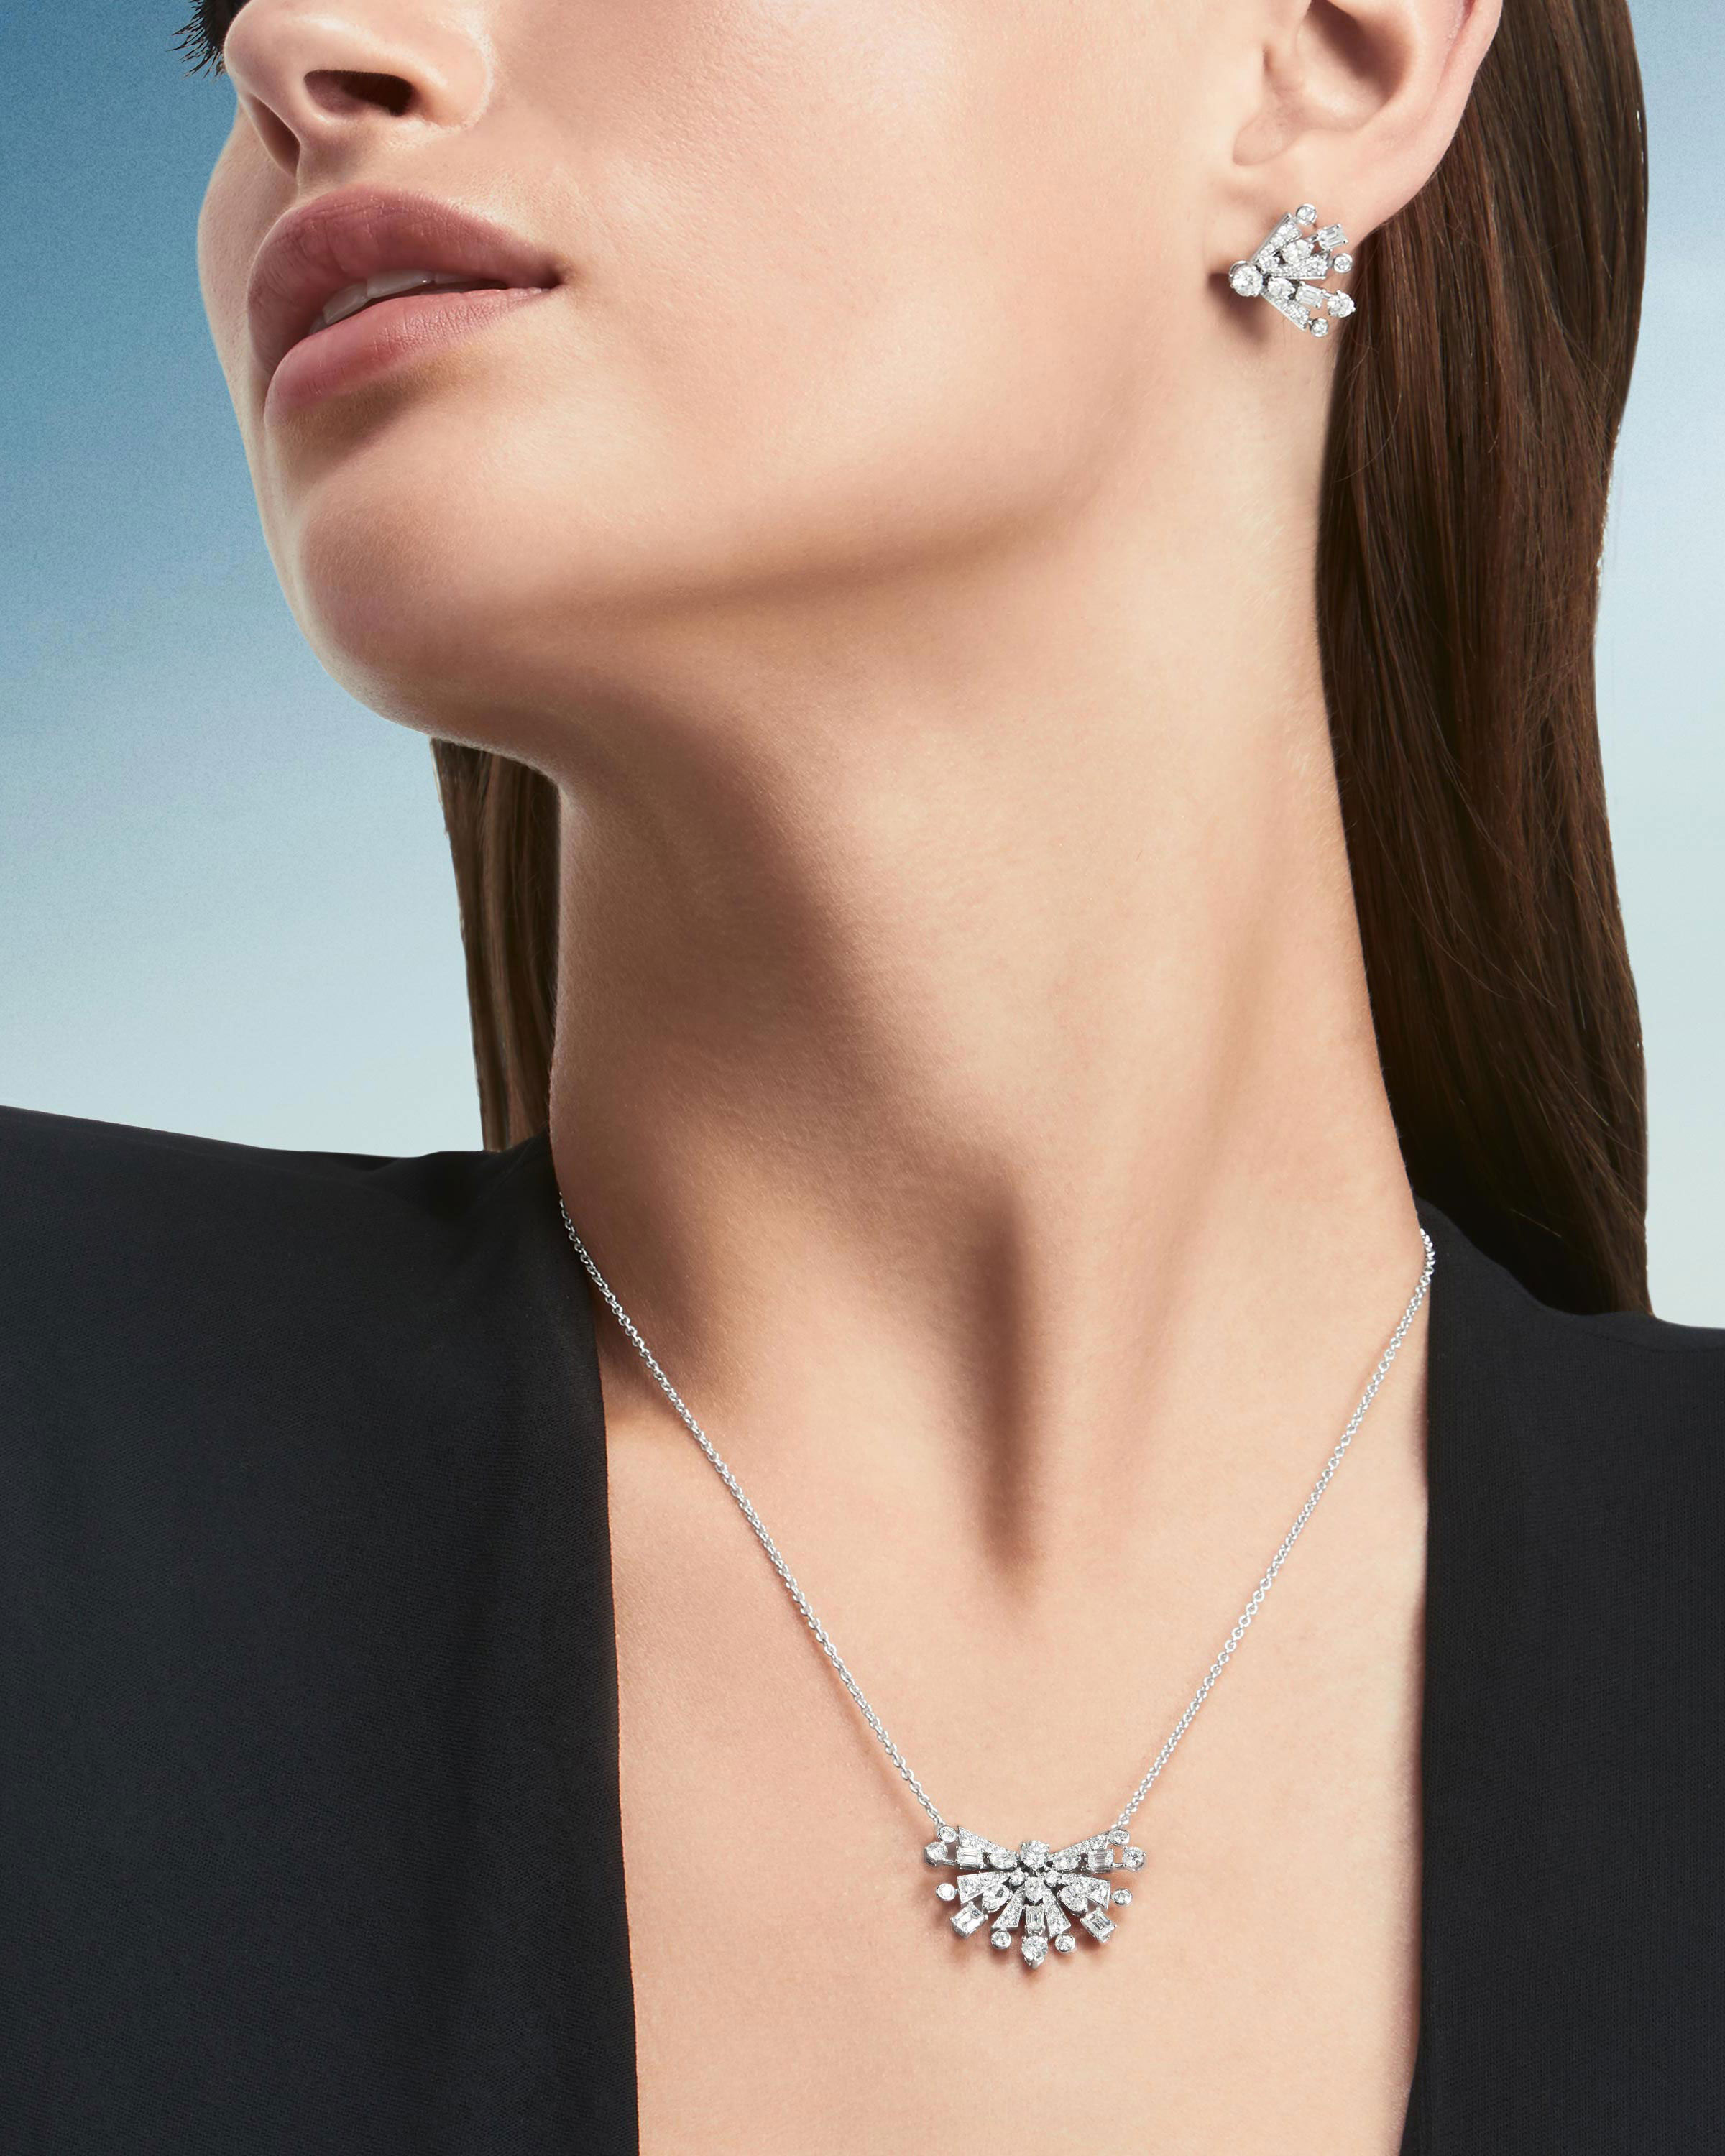 Close up of a model wearing the Graff New Dawn jewellery collection diamond earrings & pendant